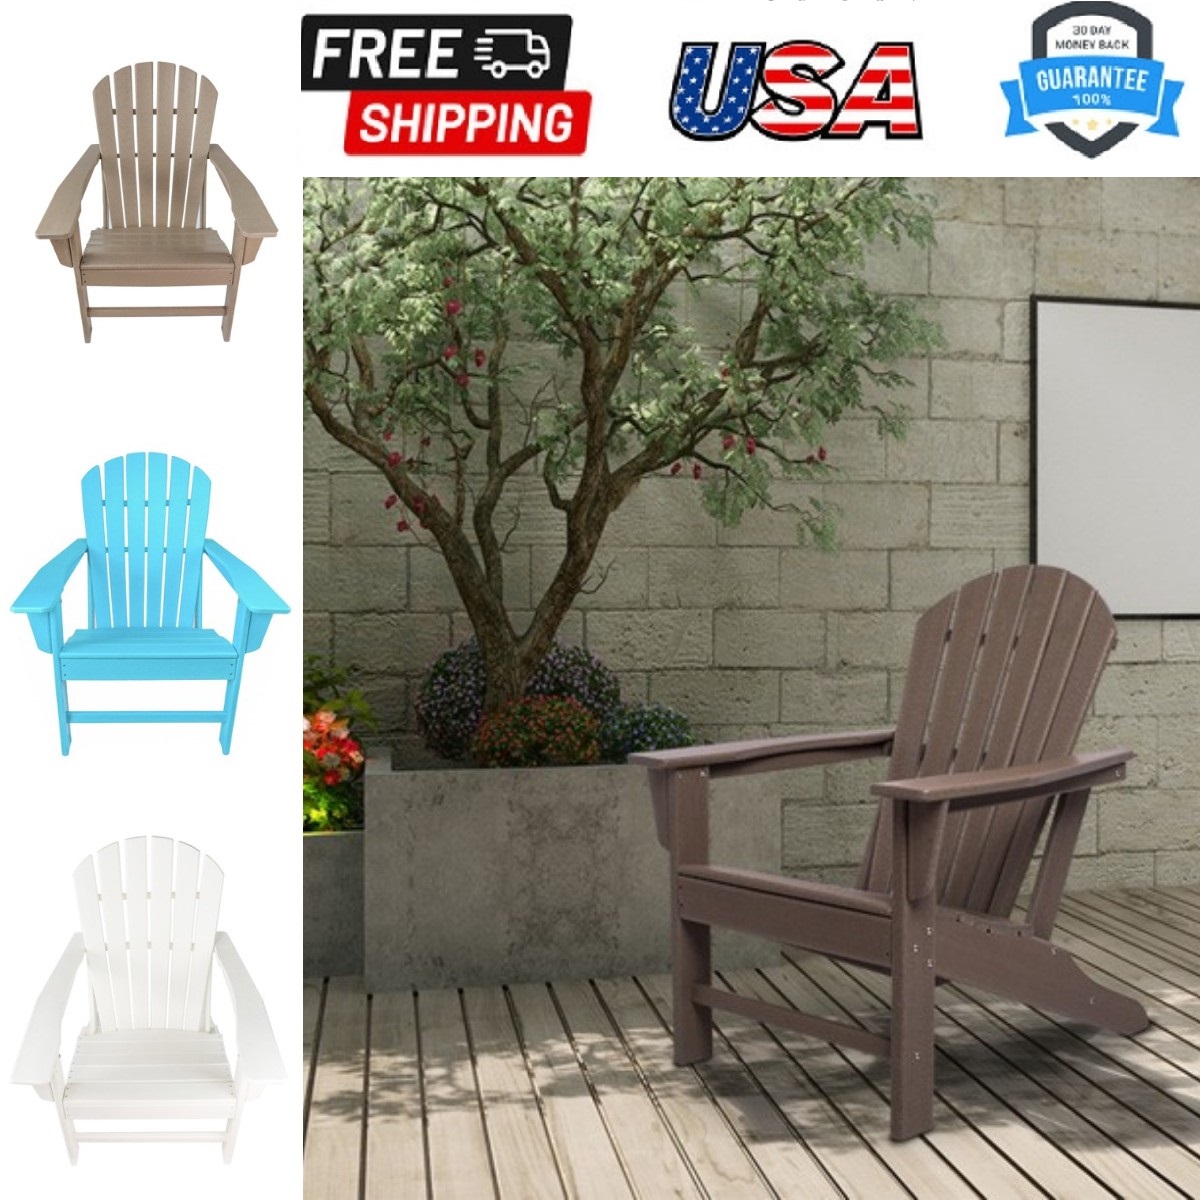 Adirondack Chair Resin, 350 lbs Capacity Load,Patio Chair Lawn Chair Outdoor Adirondack Chairs Weather Resistant for Patio Deck Garden 33.07*31.1*36.4" HDPE Resin Wood,Dark Brown - image 2 of 8